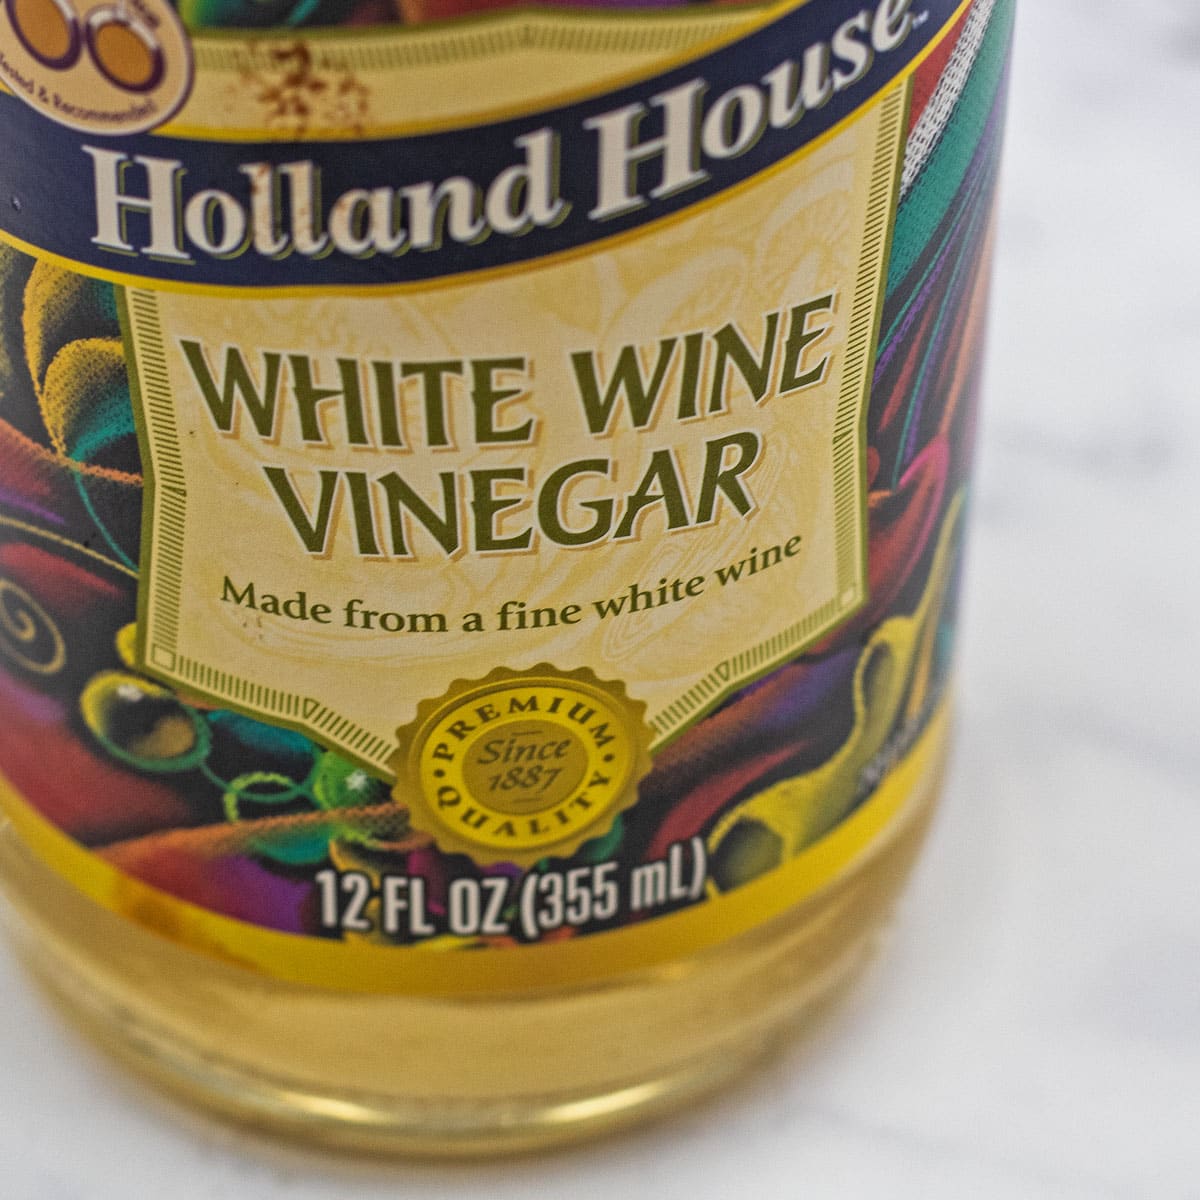 Best white wine vinegar substitute alternatives to use in cooking.